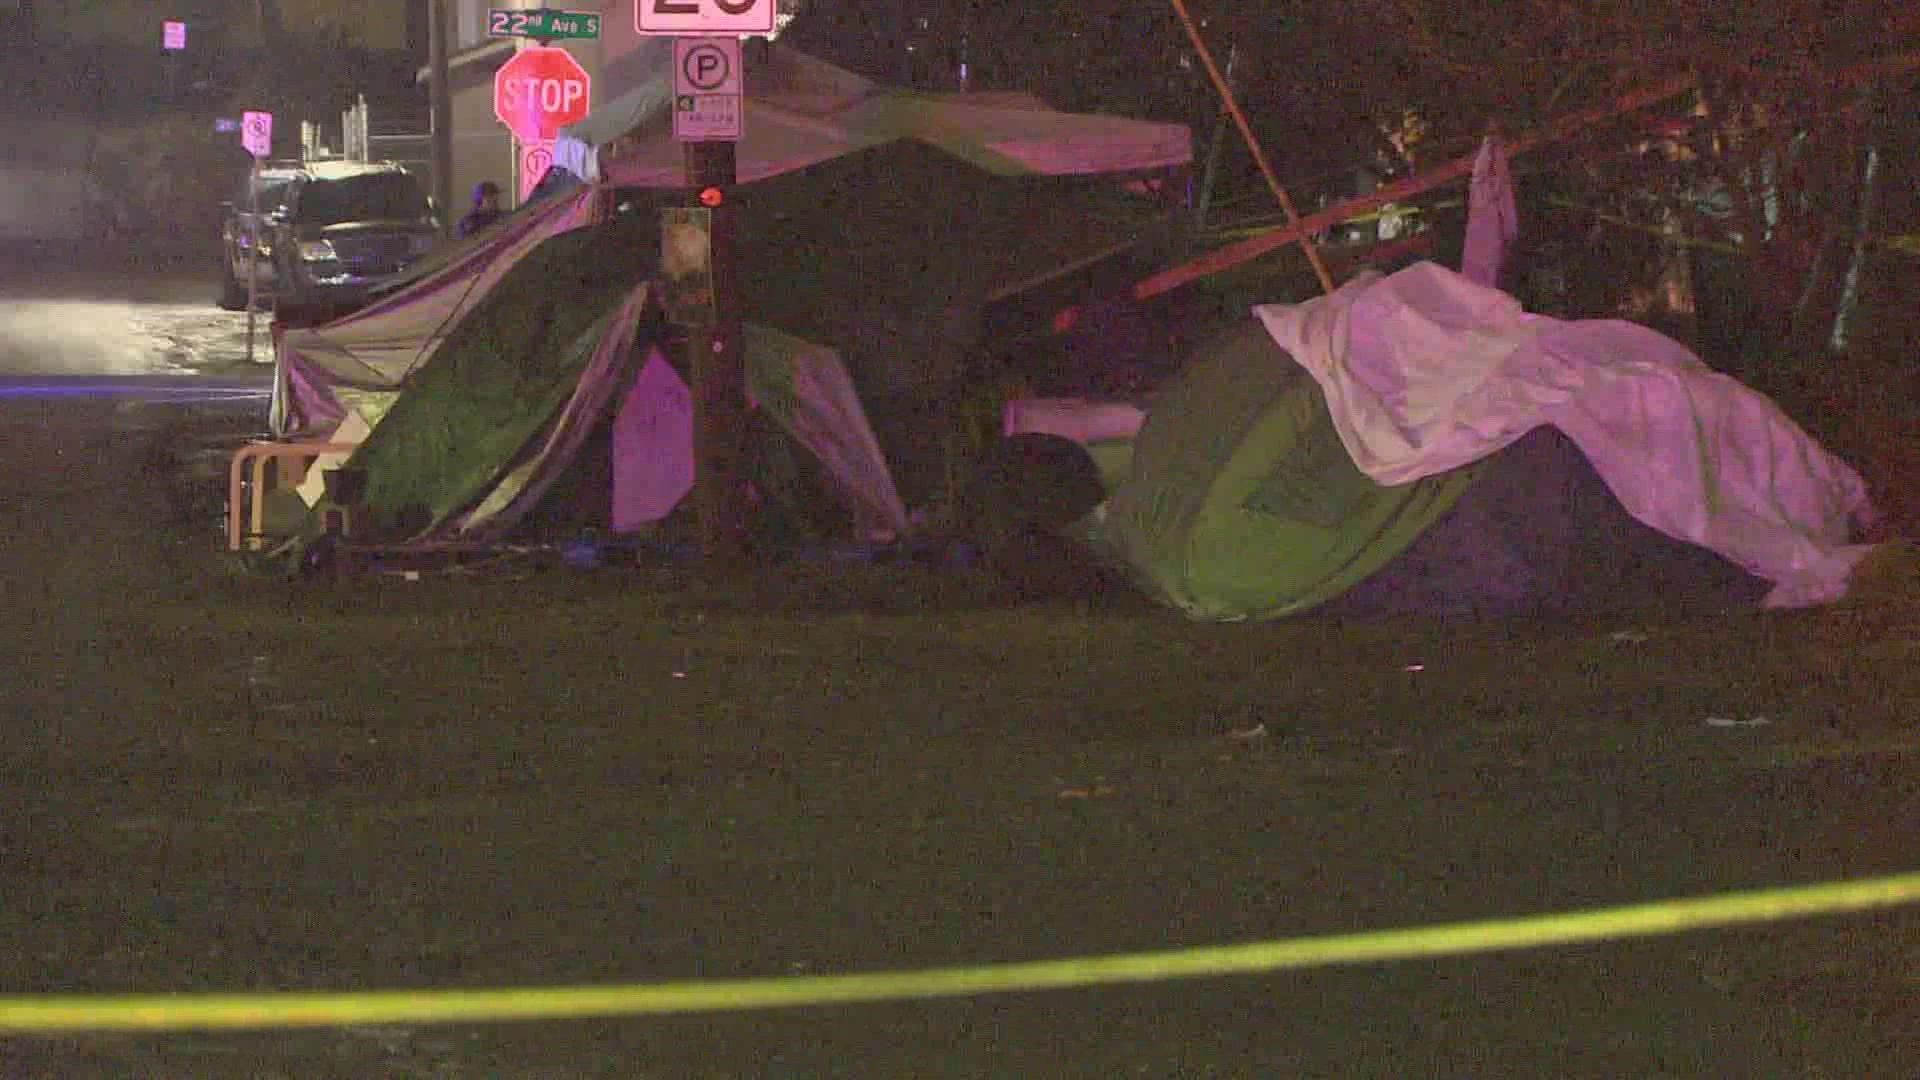 Police responded to a shooting at a homeless encampment on 22nd Ave S in Seattle's Beacon Hill neighborhood